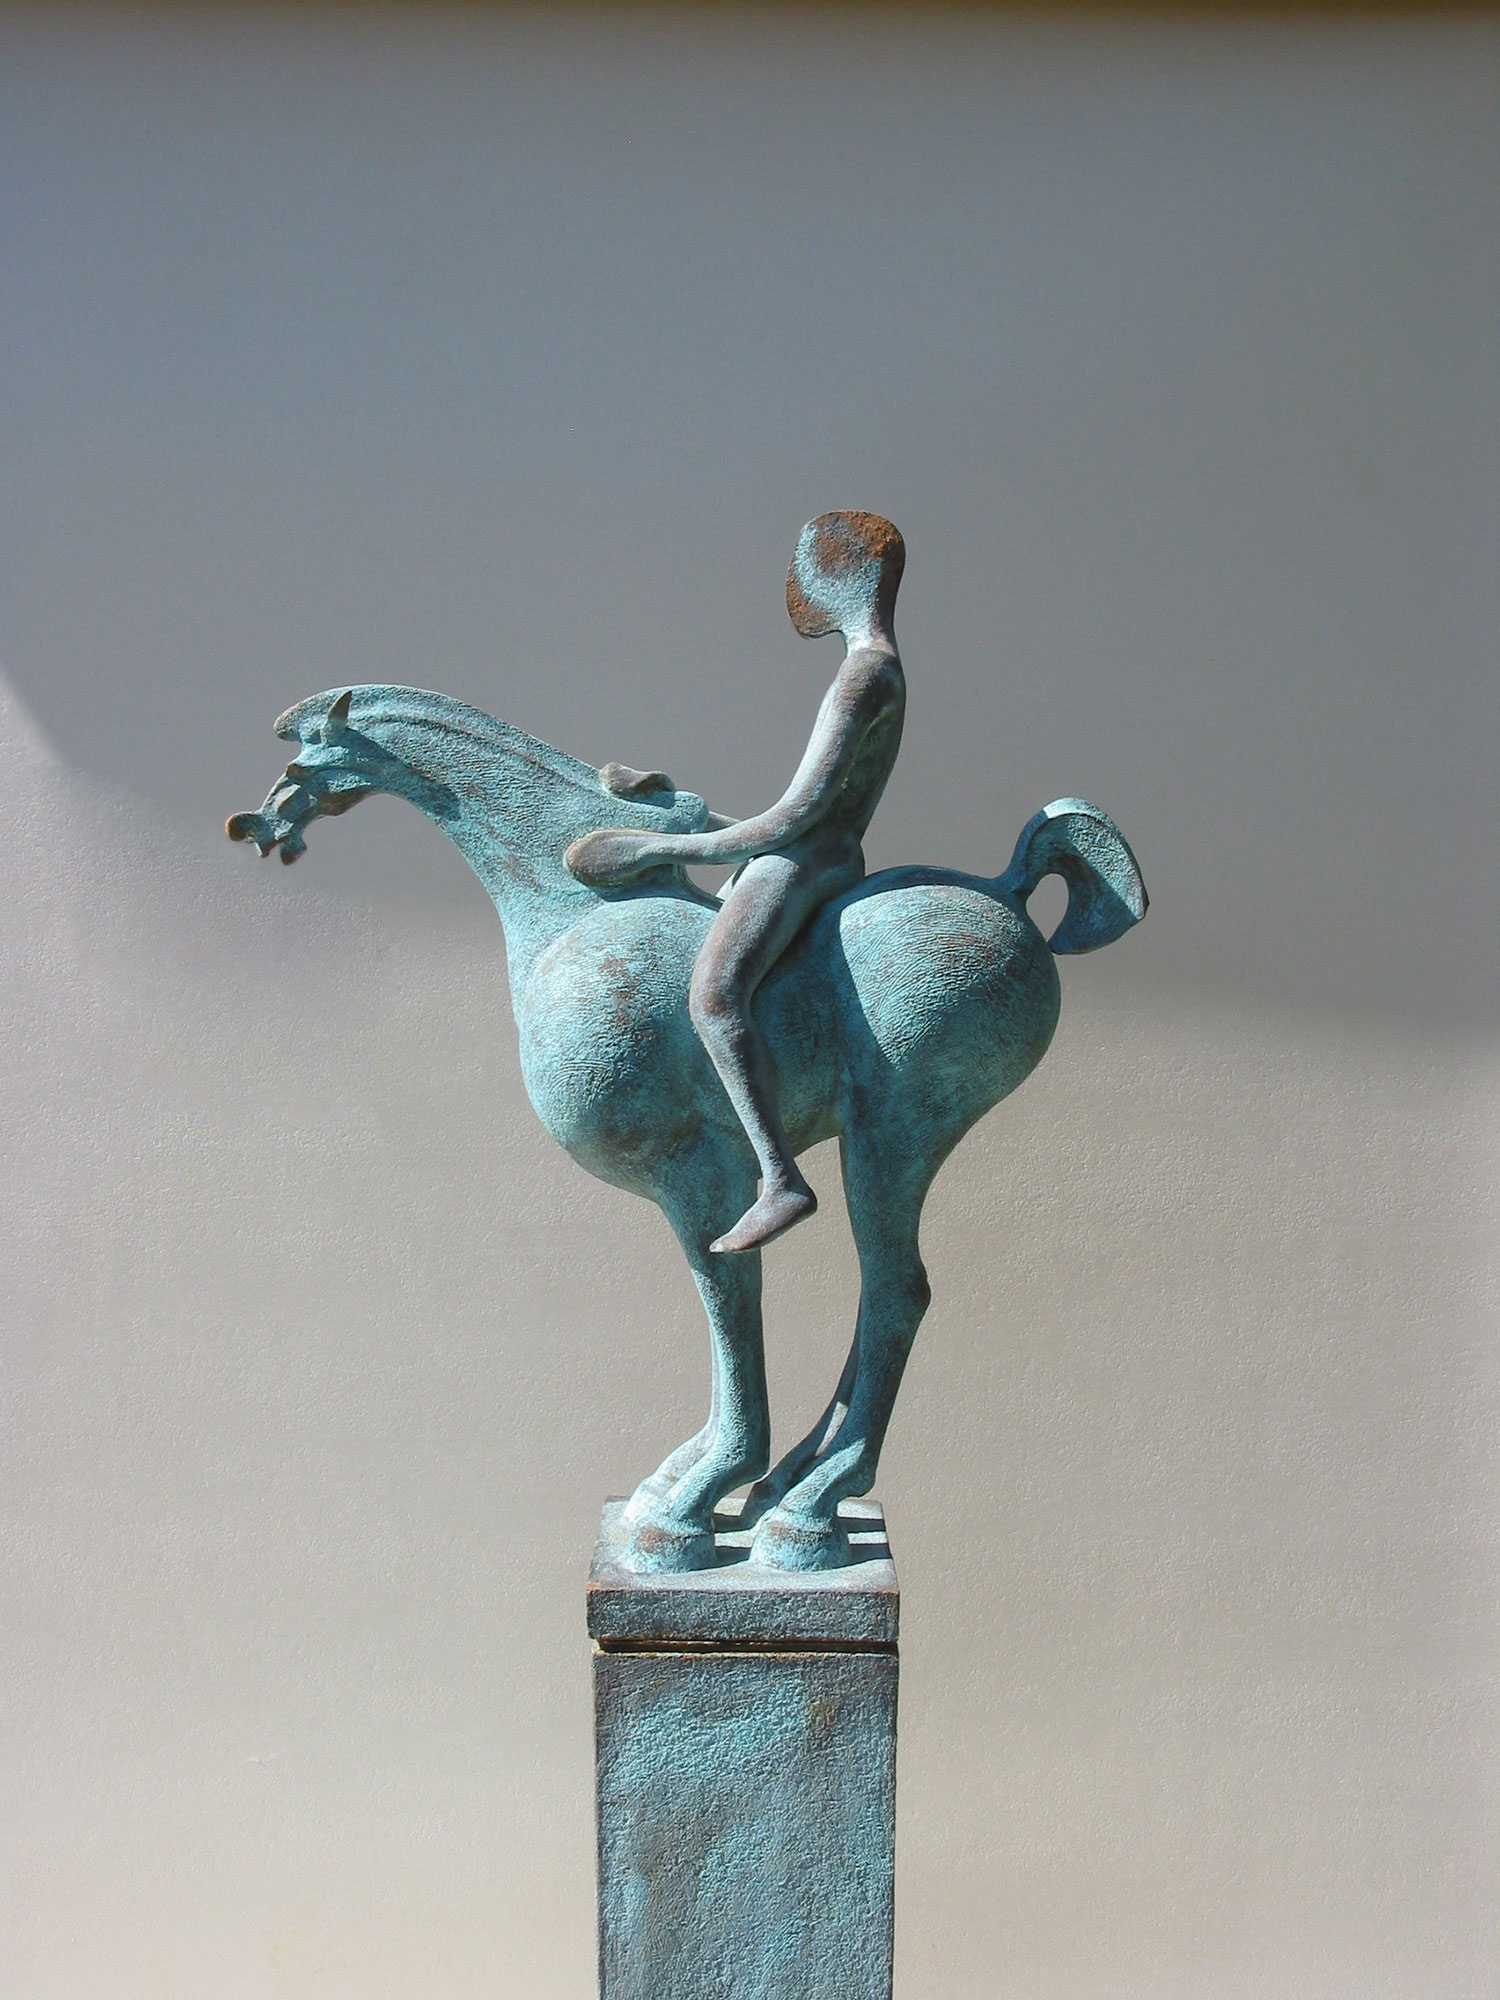  Chloros &nbsp; ©  126 cm high x 50 cm wide  Unique  Chlorus - Greek lexicon for pale green. The piece takes its energy from a Chinese dynamic, though paradoxically it is hauntingly still.  The horse’s head is diminutive - a classical technique which